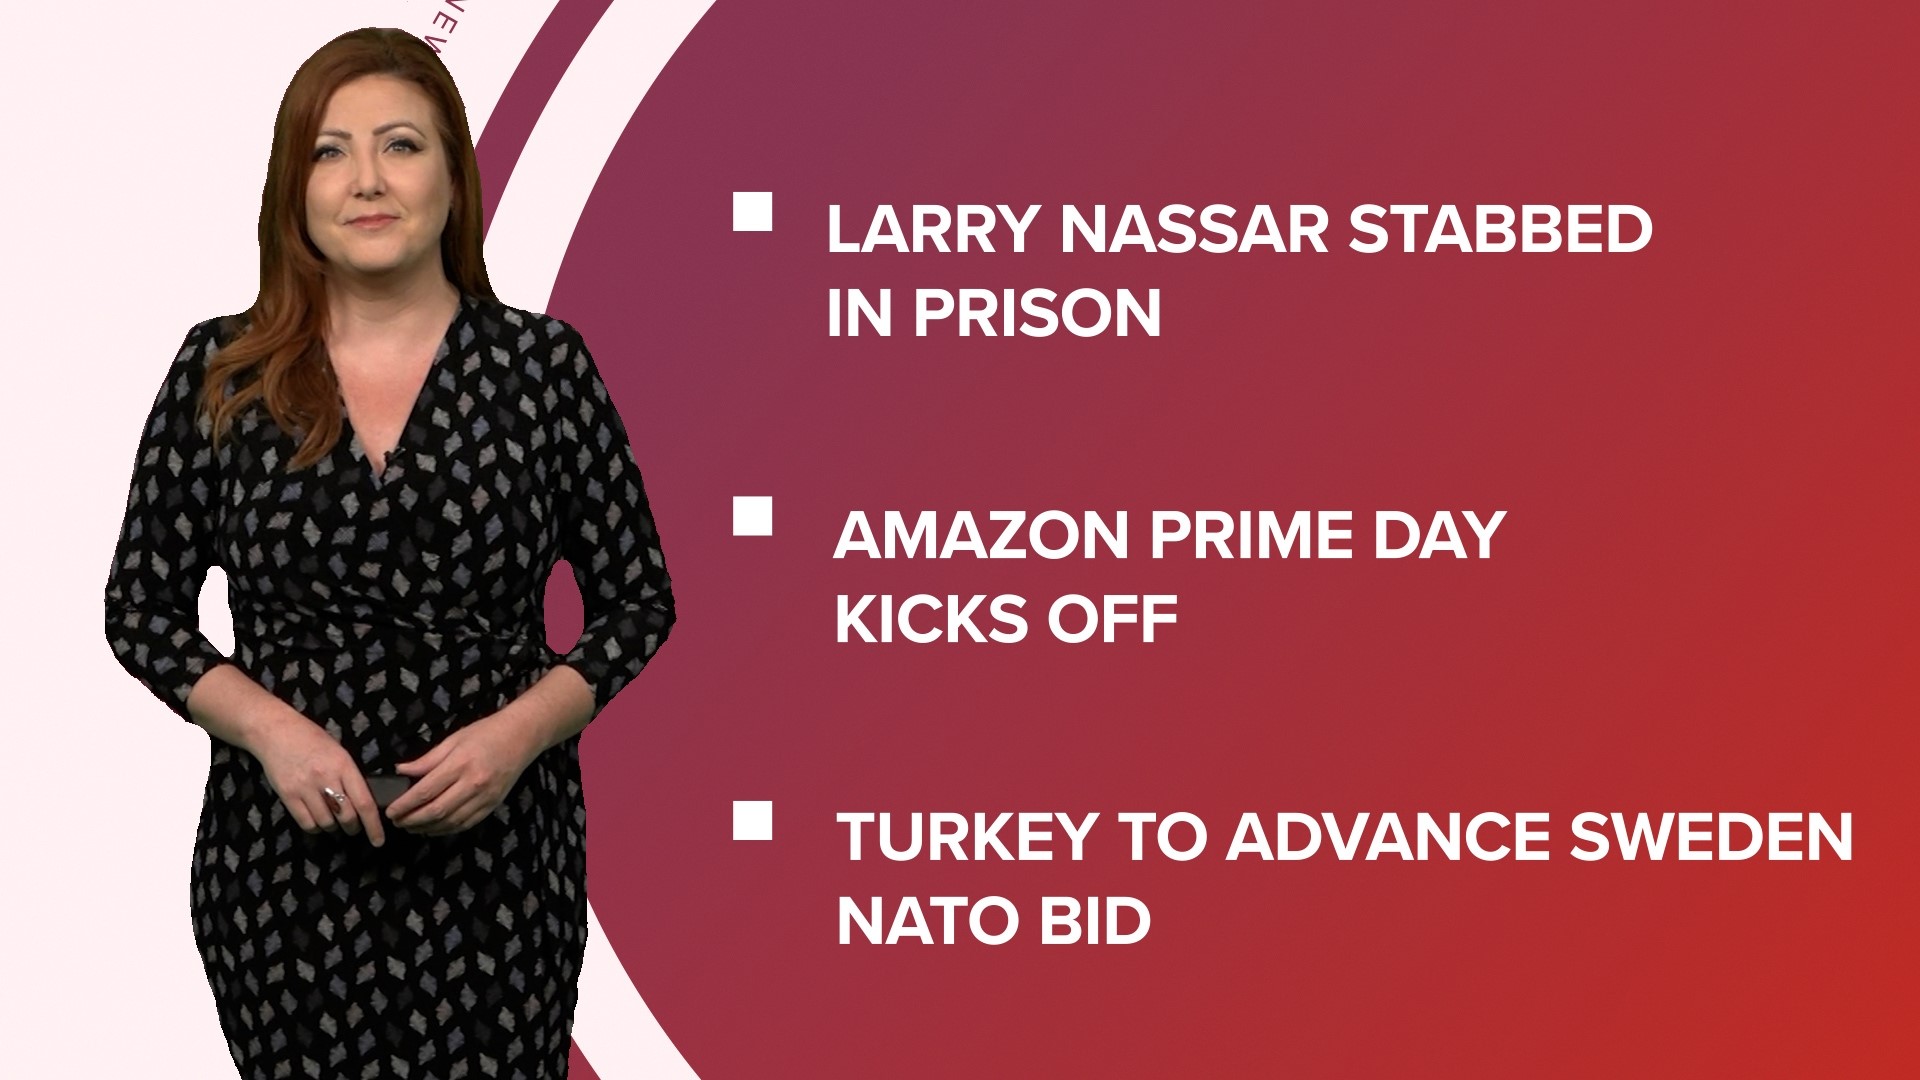 A look at what is happening in the news from Larry Nassar stabbed in prison to Amazon Prime Day underway and preparing for the 'Barbie' and 'Oppenheimer' films.